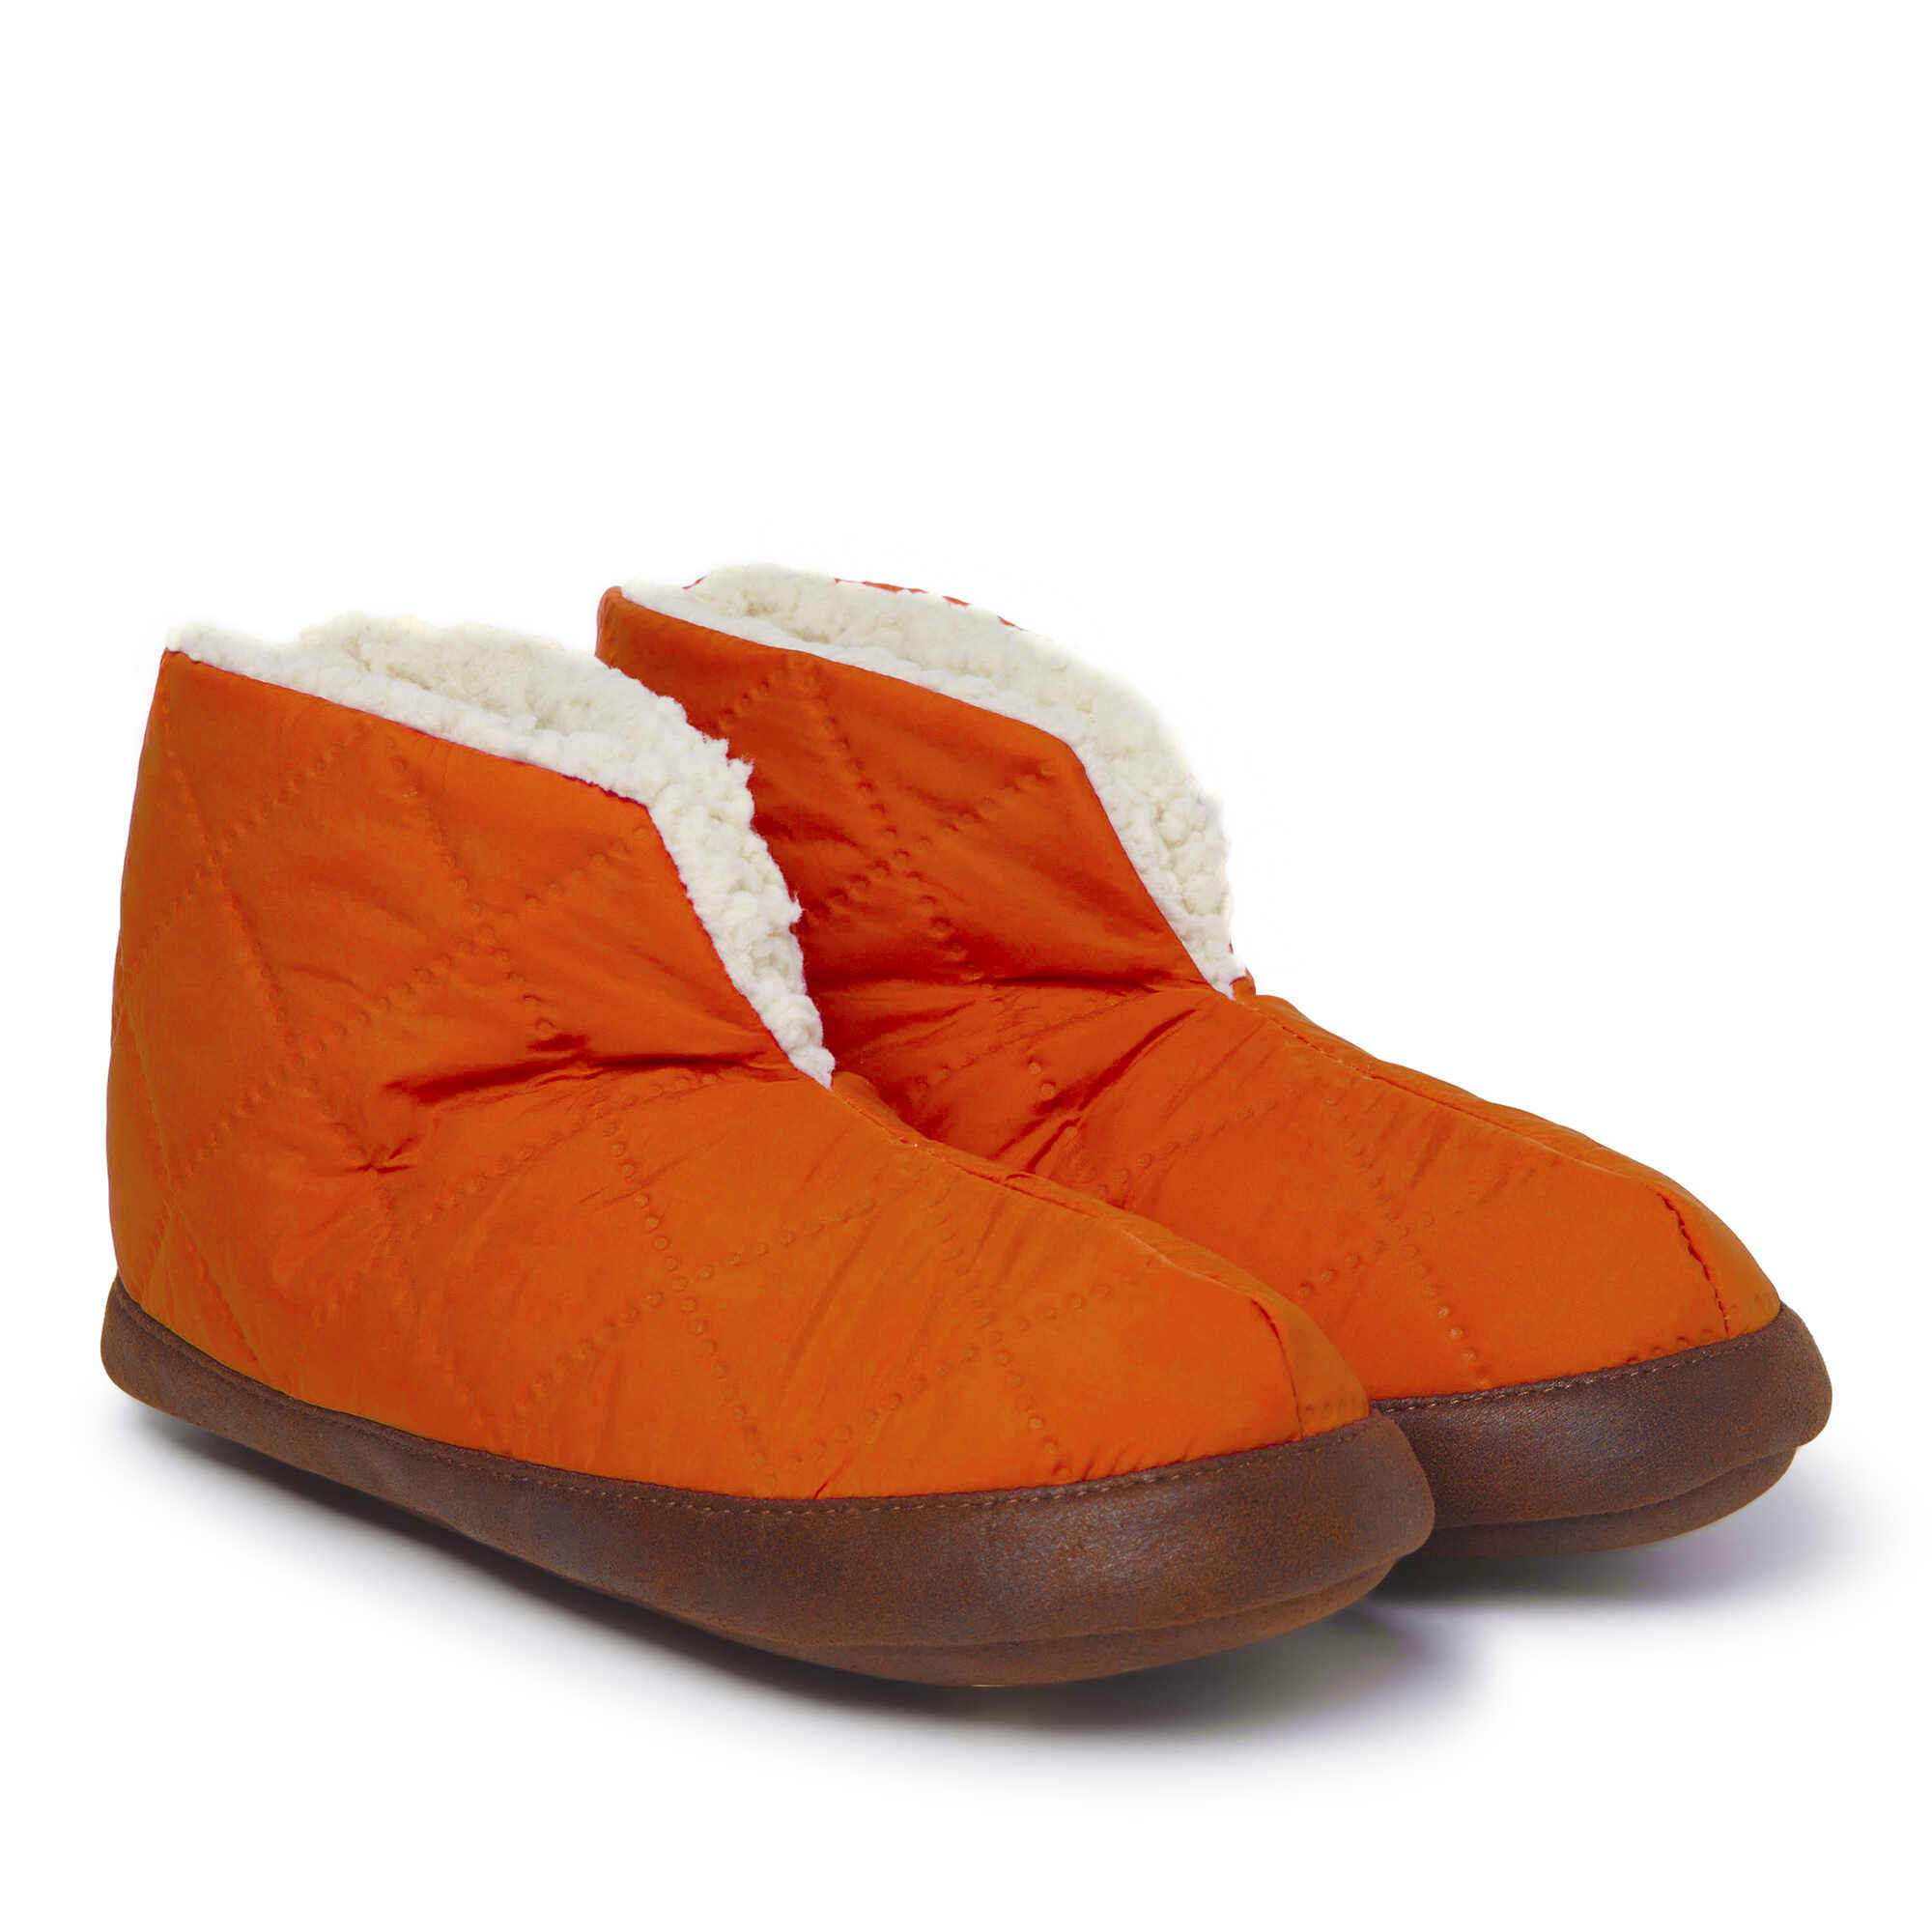 Sleeping Bag Down Slippers Ultralight Soft Cotton Shoes Pull On Feet Covers 